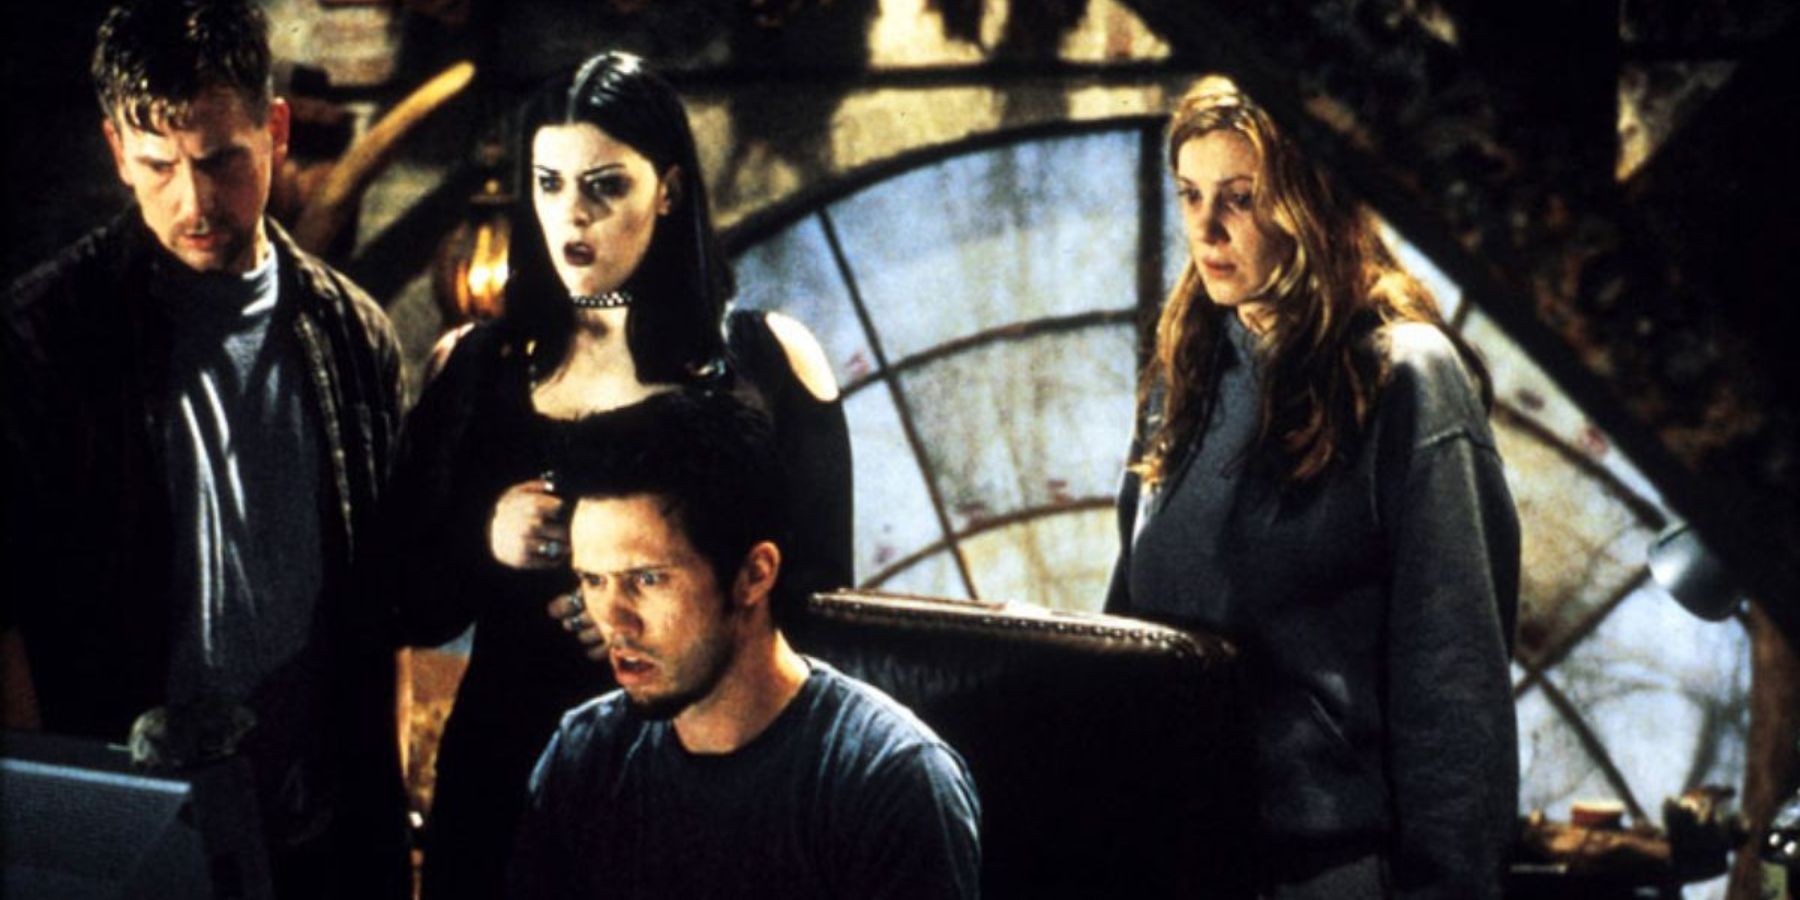 The characters looking scared in Book Of Shadows: Blair Witch 2